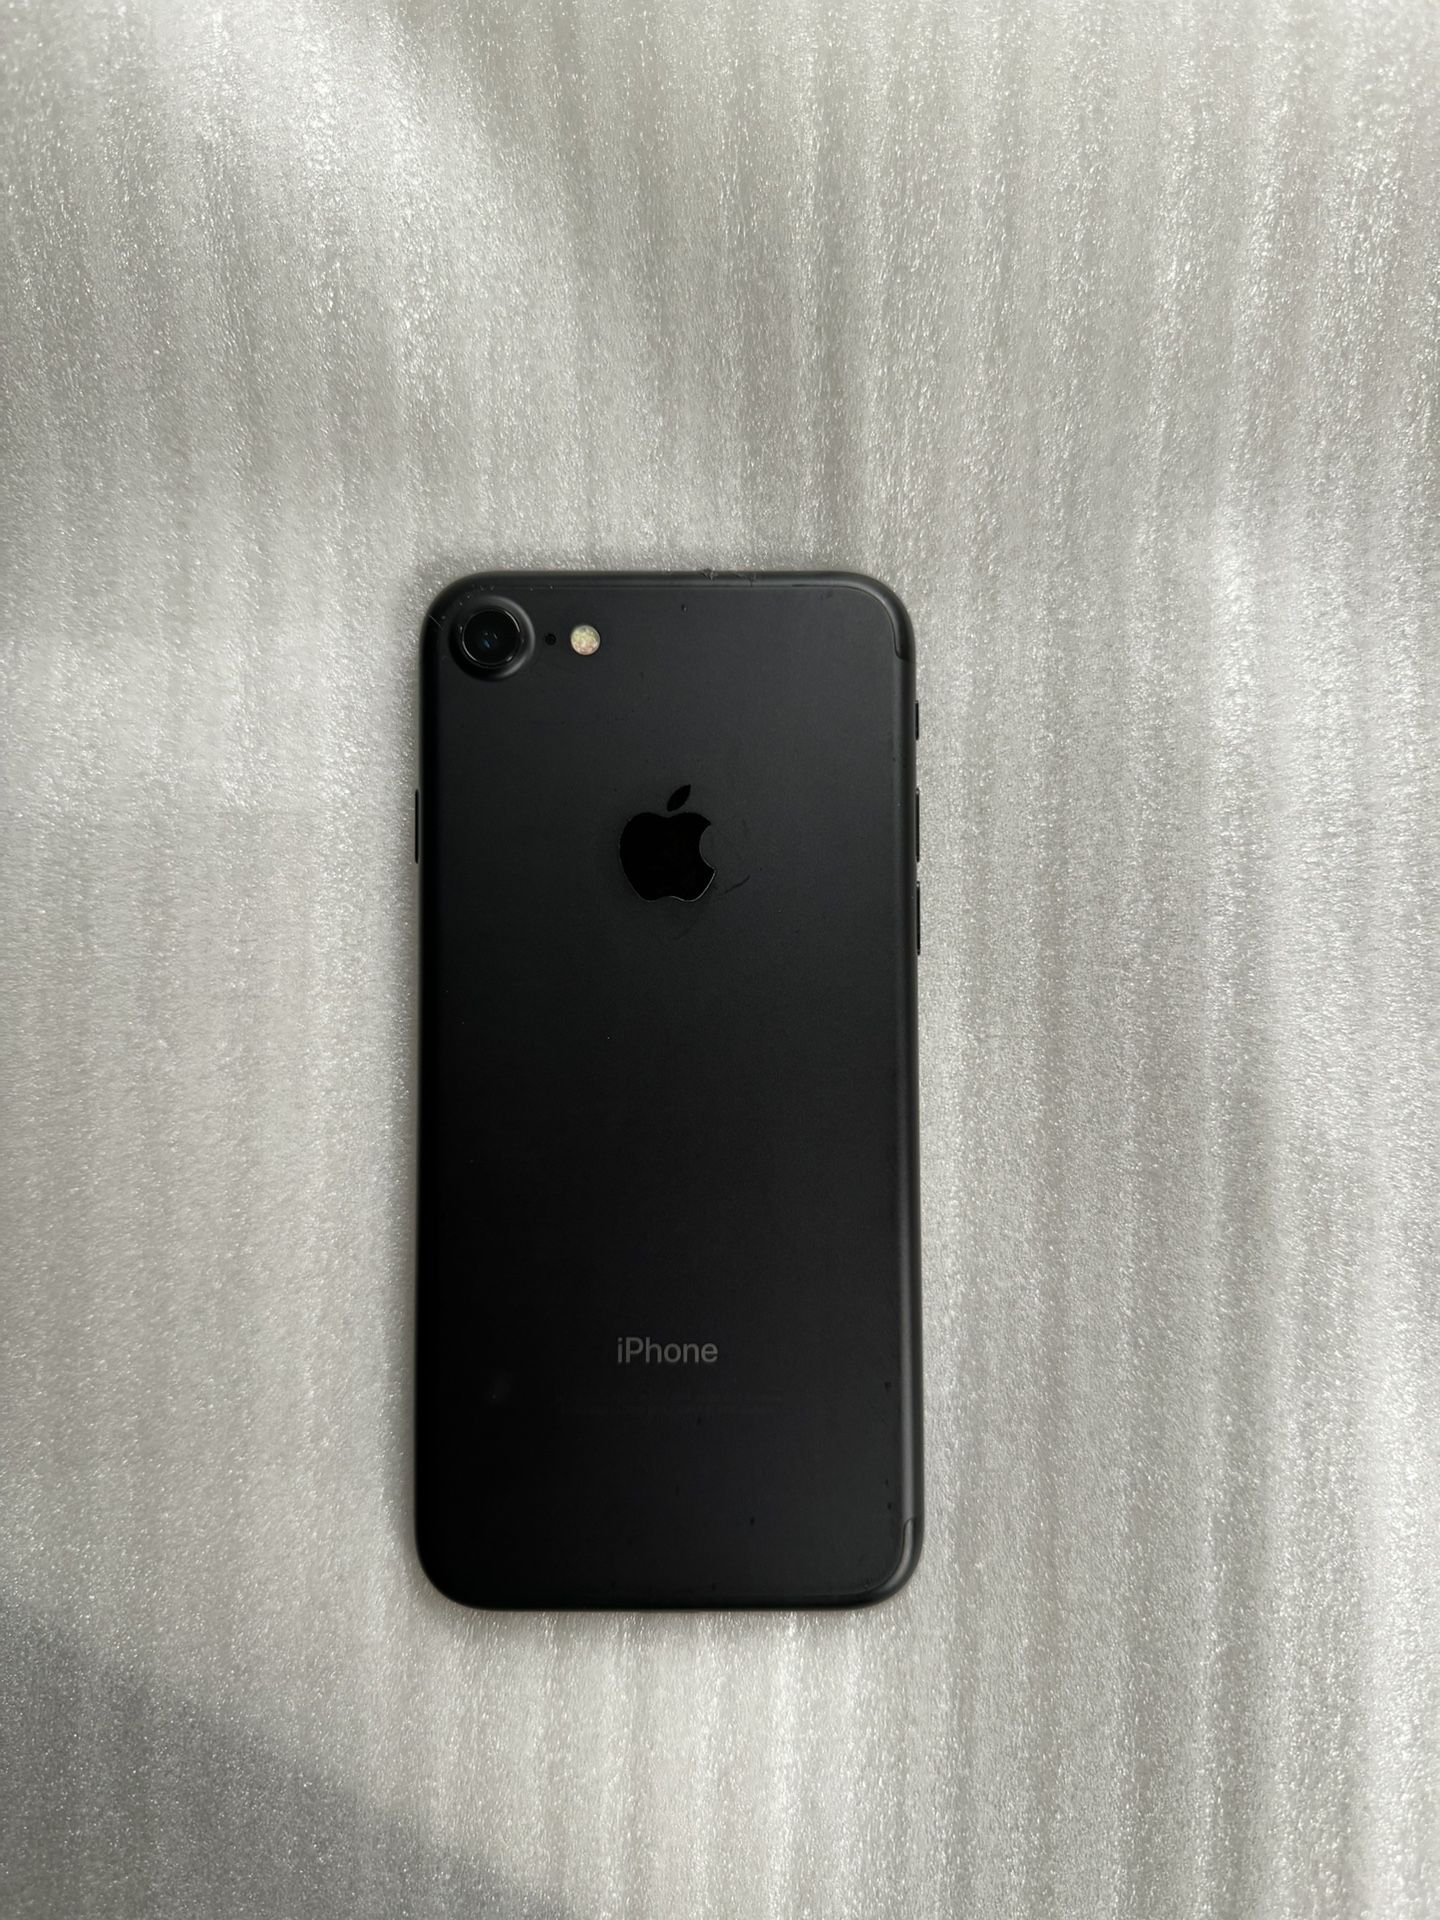 iPhone 7 Unlocked - Great condition 